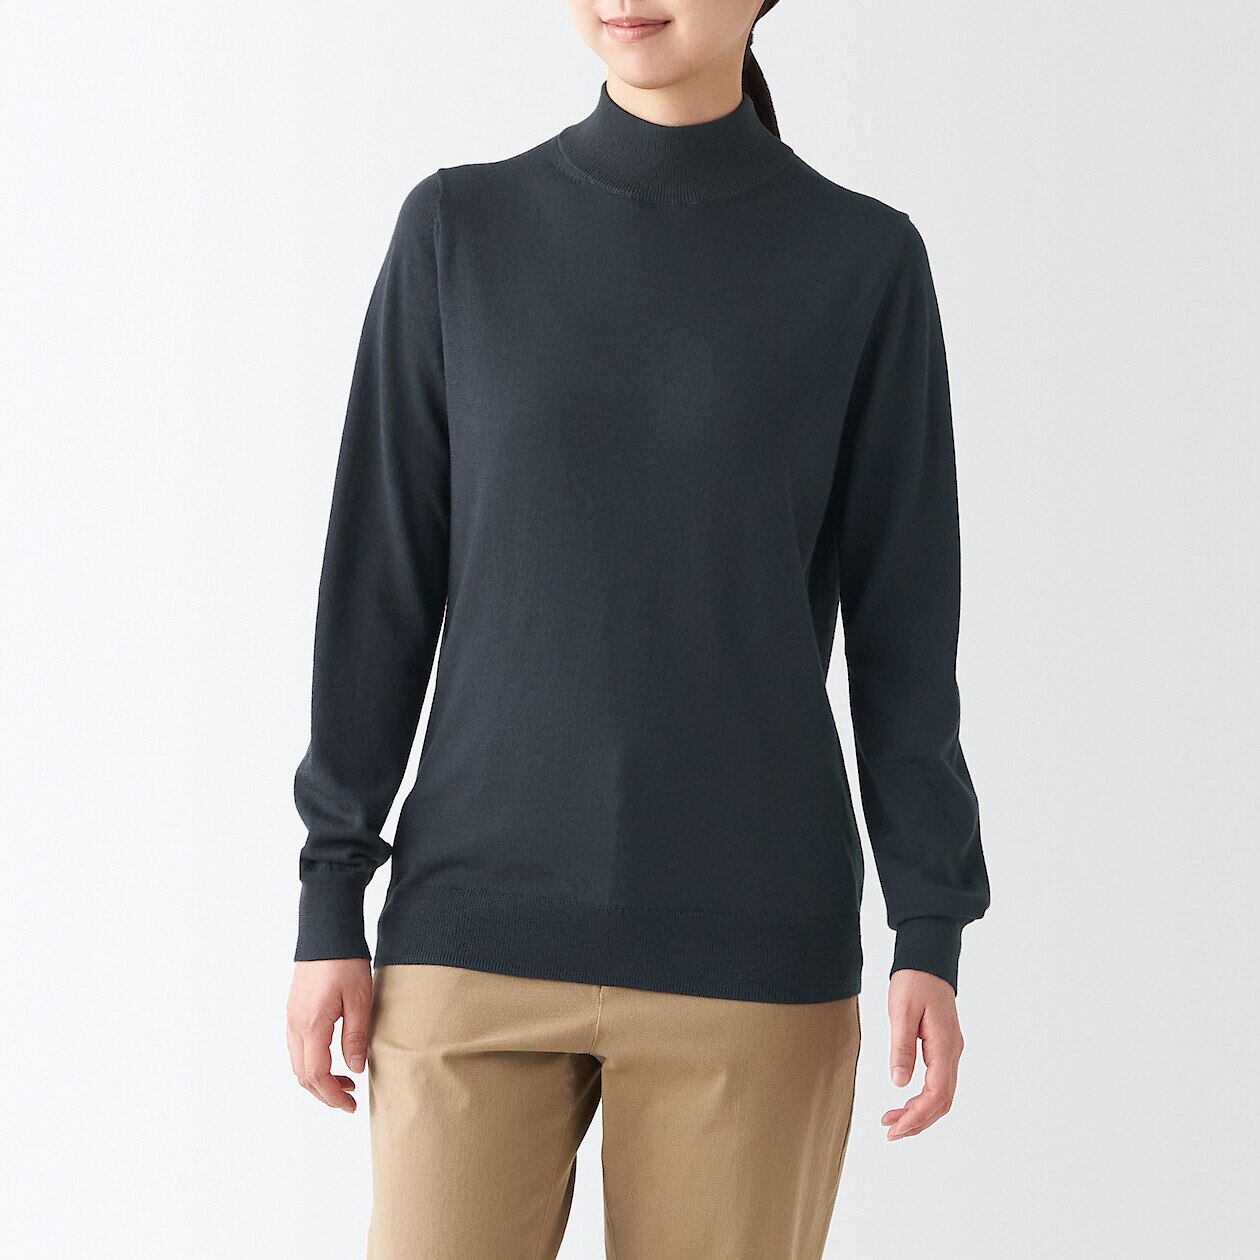 Women's Non-Itchy Washable Mock Neck Jumper